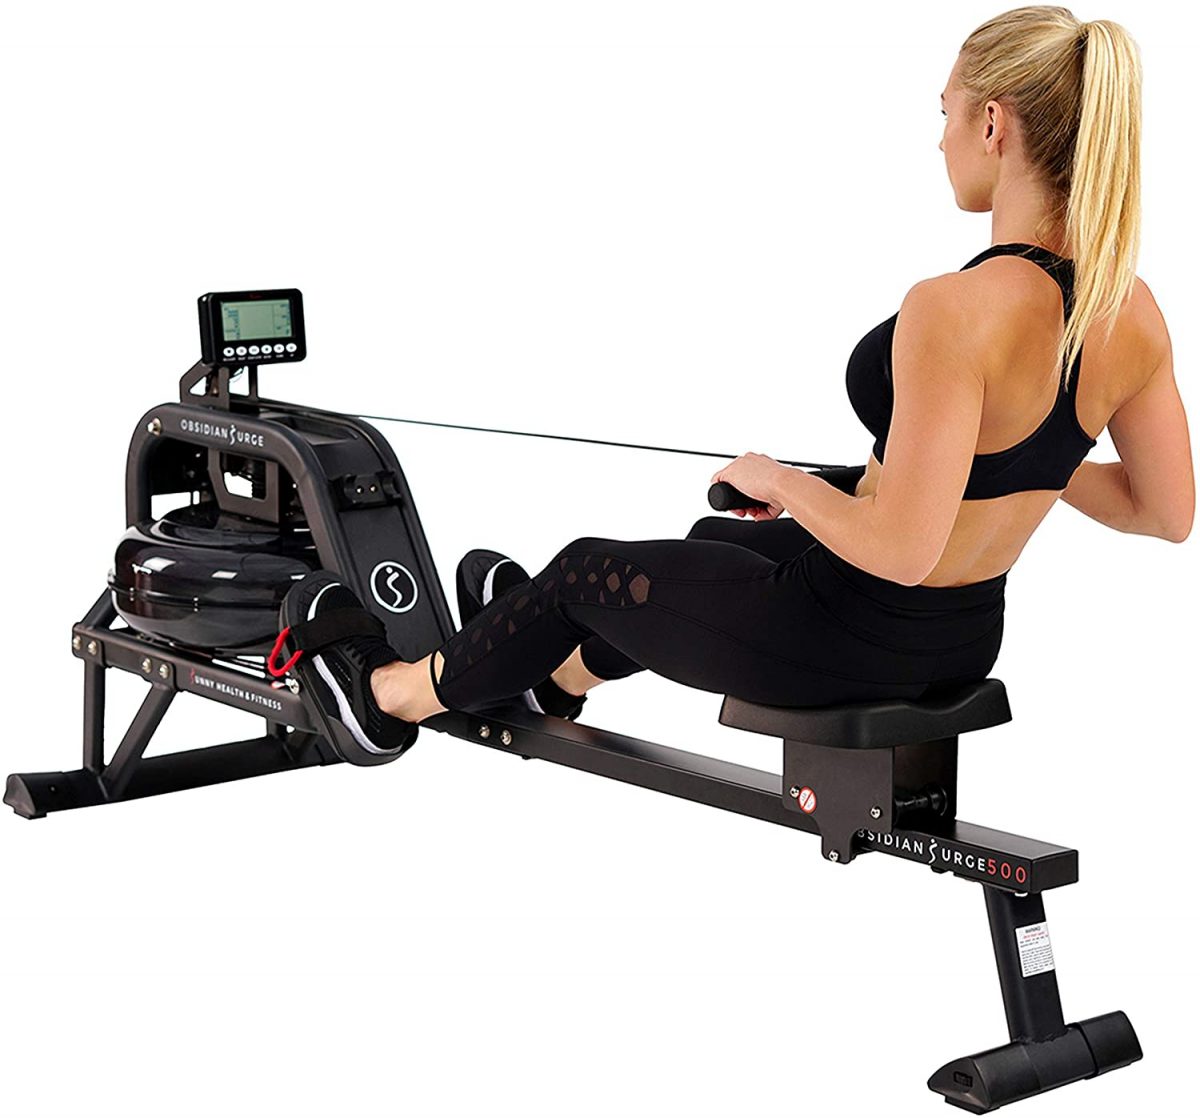 Top 10 Best Rowing Machines for home use in 2021 Complete Reviews